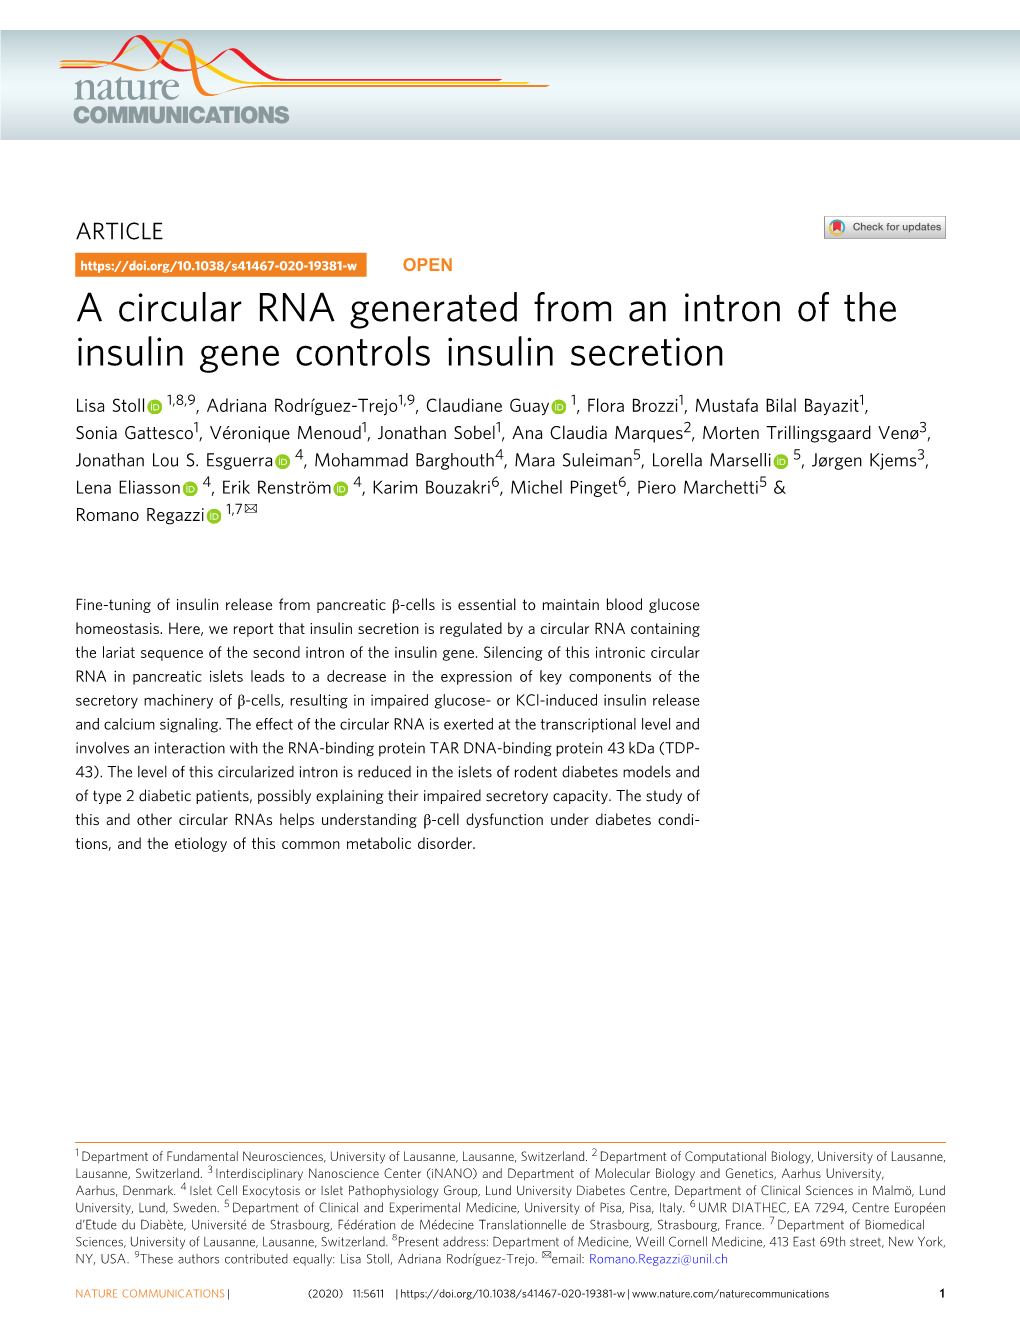 A Circular RNA Generated from an Intron of the Insulin Gene Controls Insulin Secretion